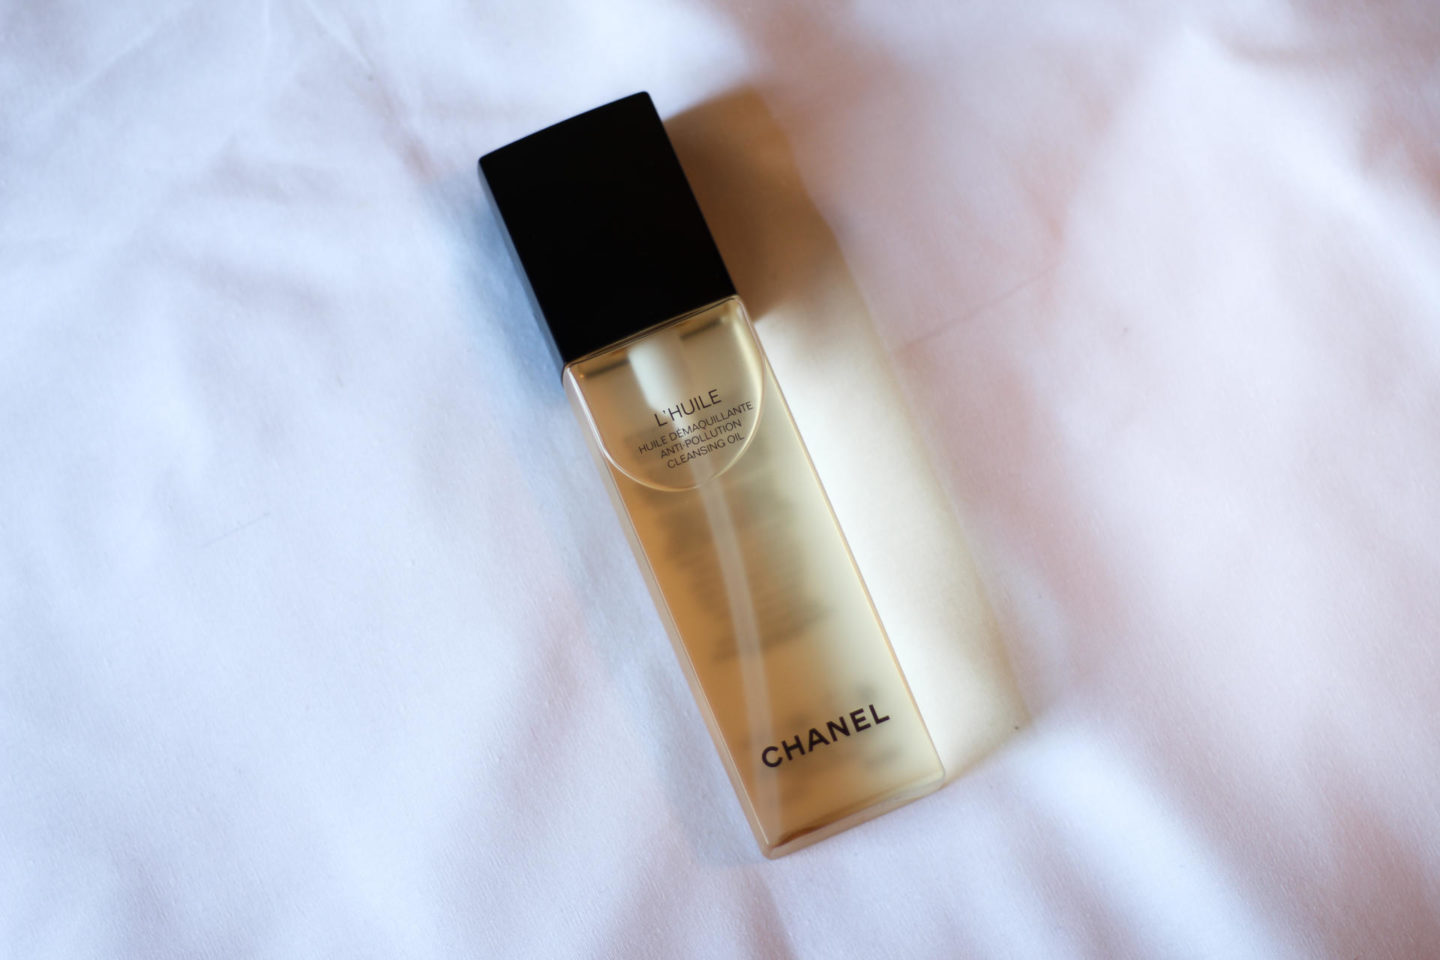 Chanel L’Huile Anti-Pollution Cleansing Oil Review